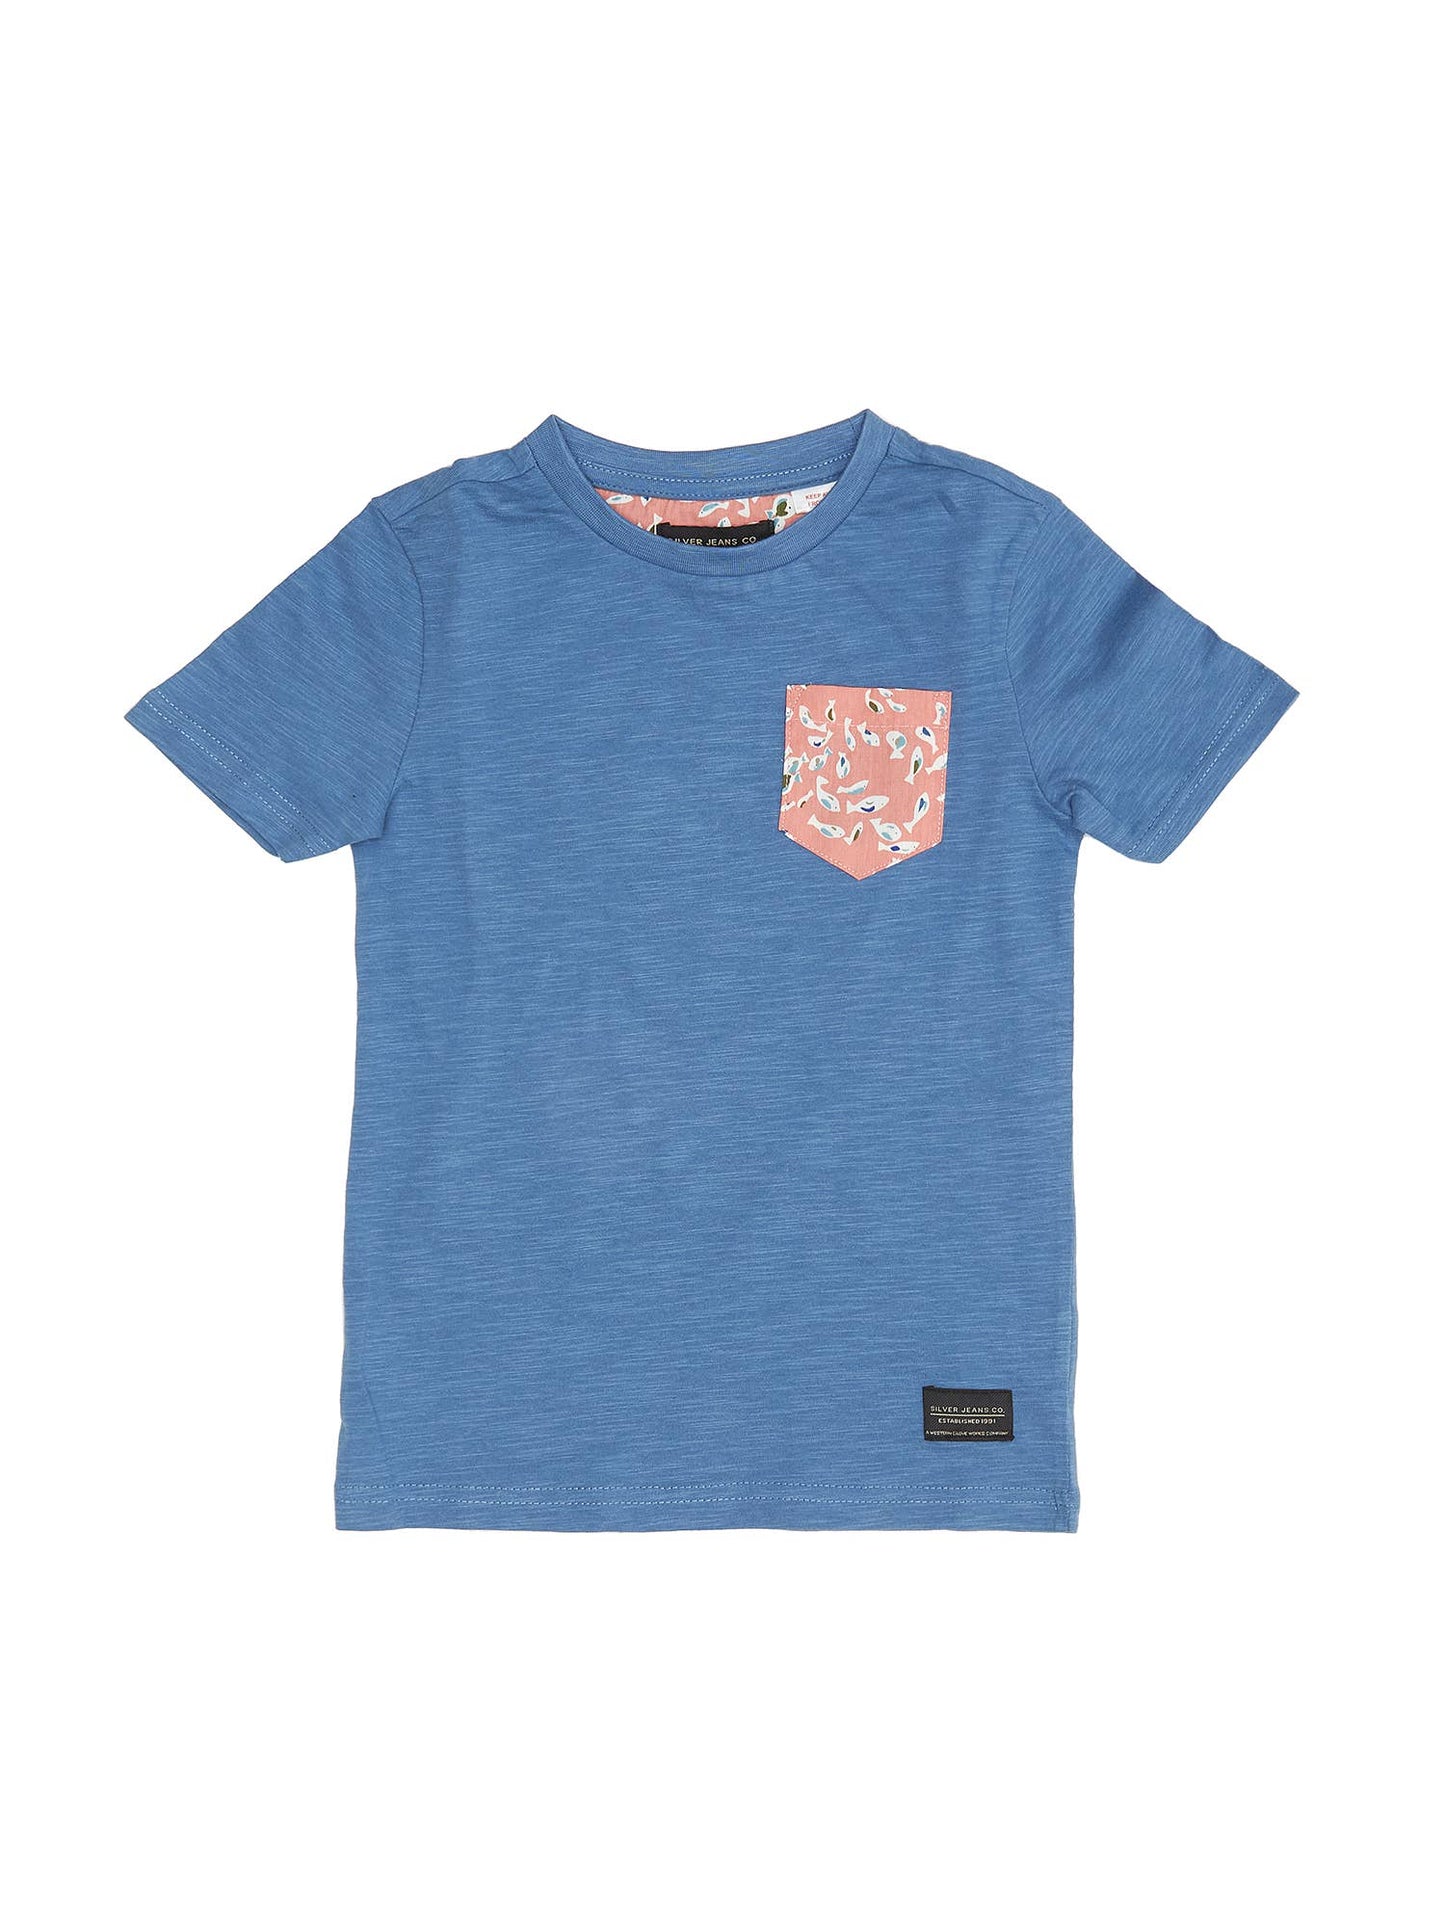 Silver Jeans - SBS235941 - BOYS T-SHIRT WITH CONTRAST POCKET